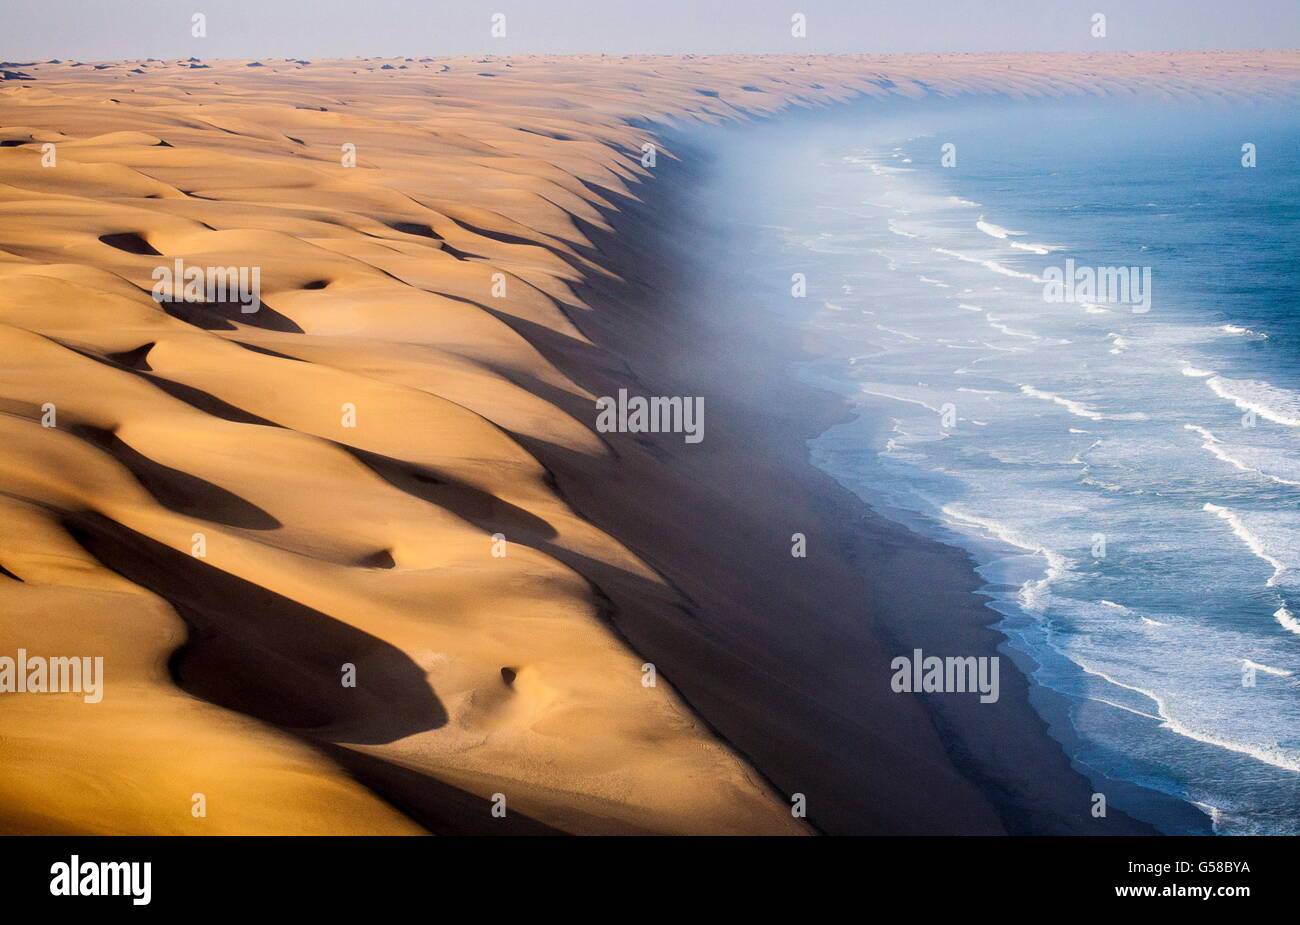 The waves of the Atlantic Ocean advance toward the sand dunes of the Namib Desert Namibia Africa Stock Photo